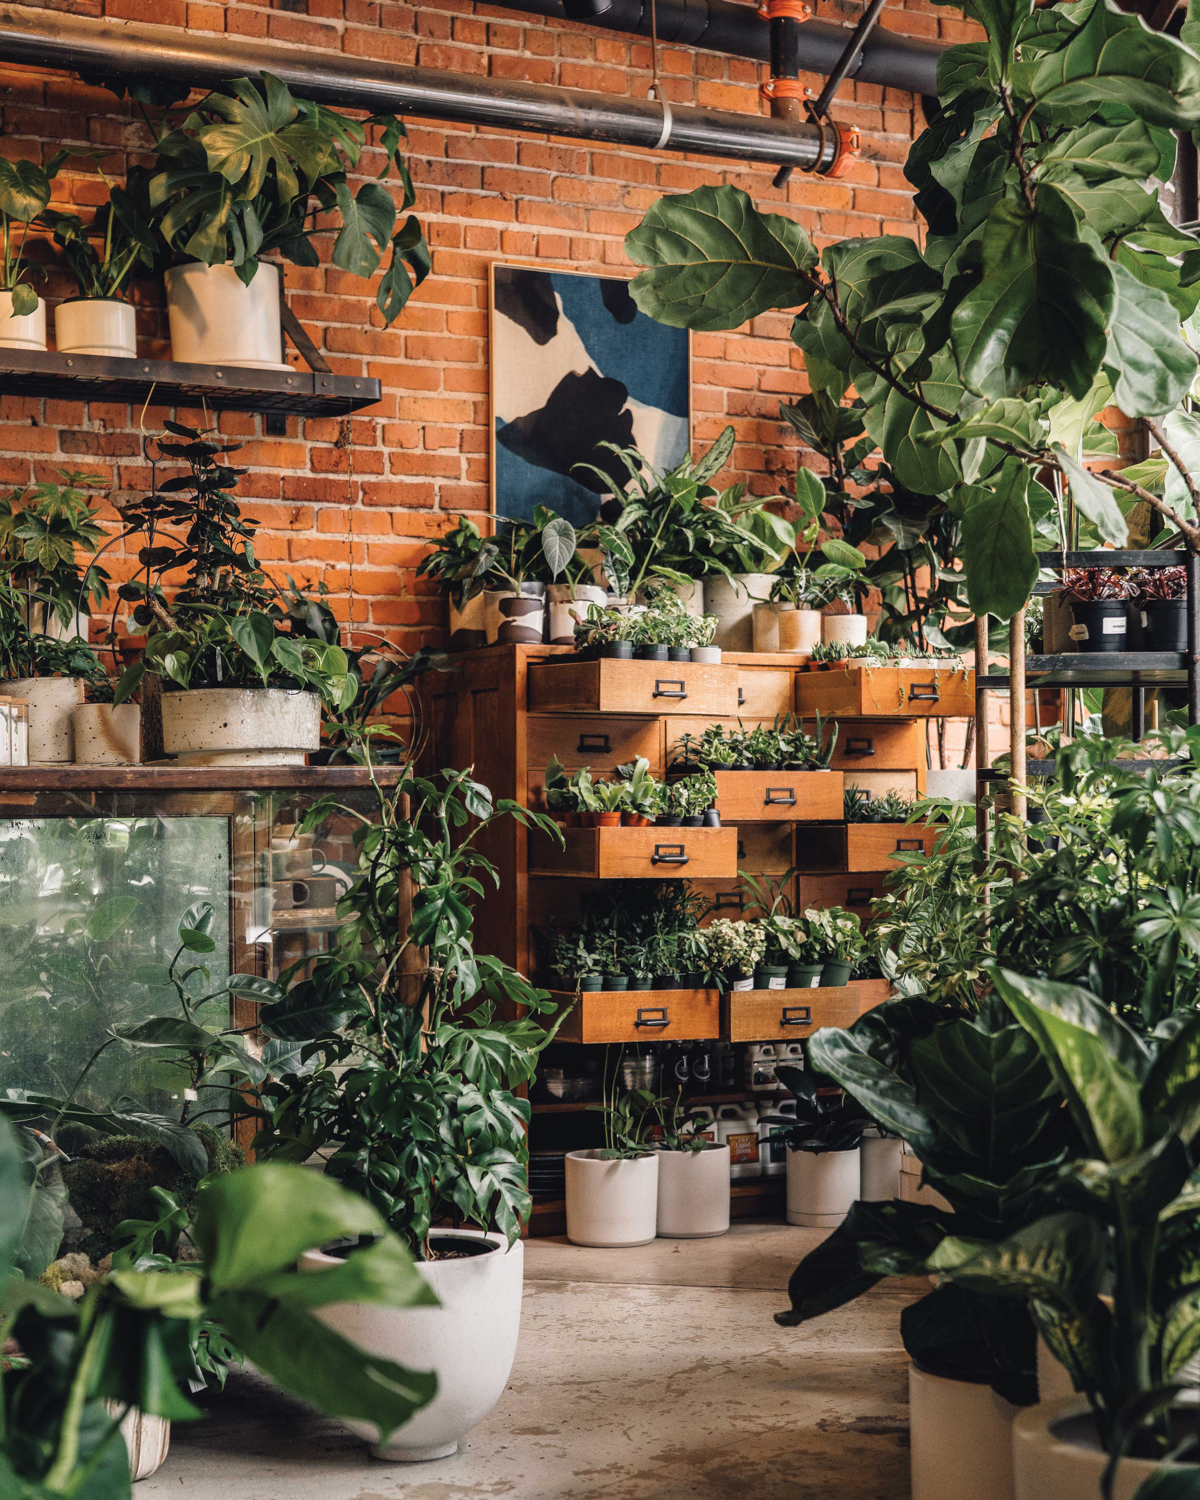 Store filled with plants on the floor and shelves set against brick walls